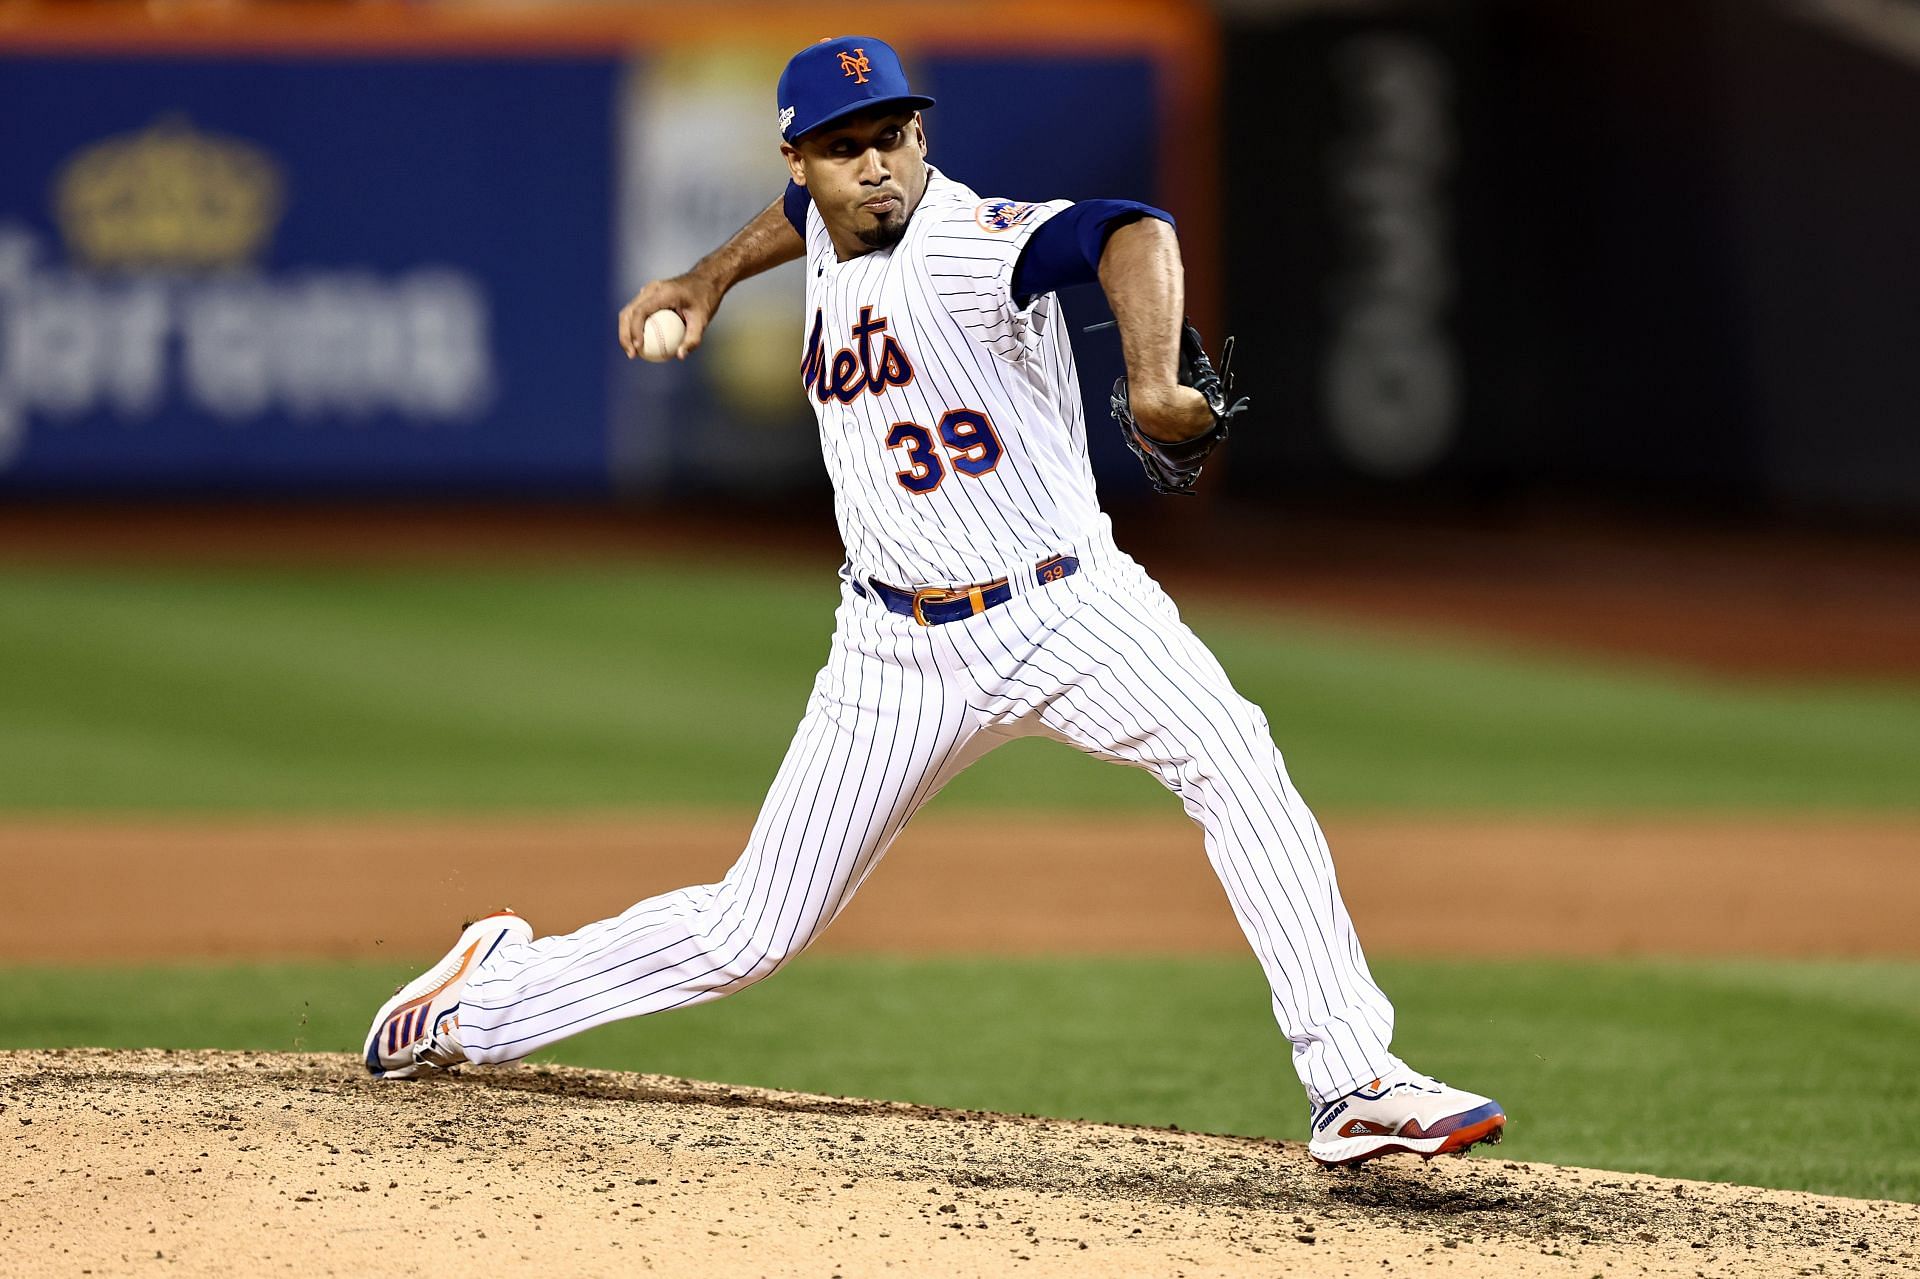 Mets News: Mets sign Jacob deGrom to five-year contract extension